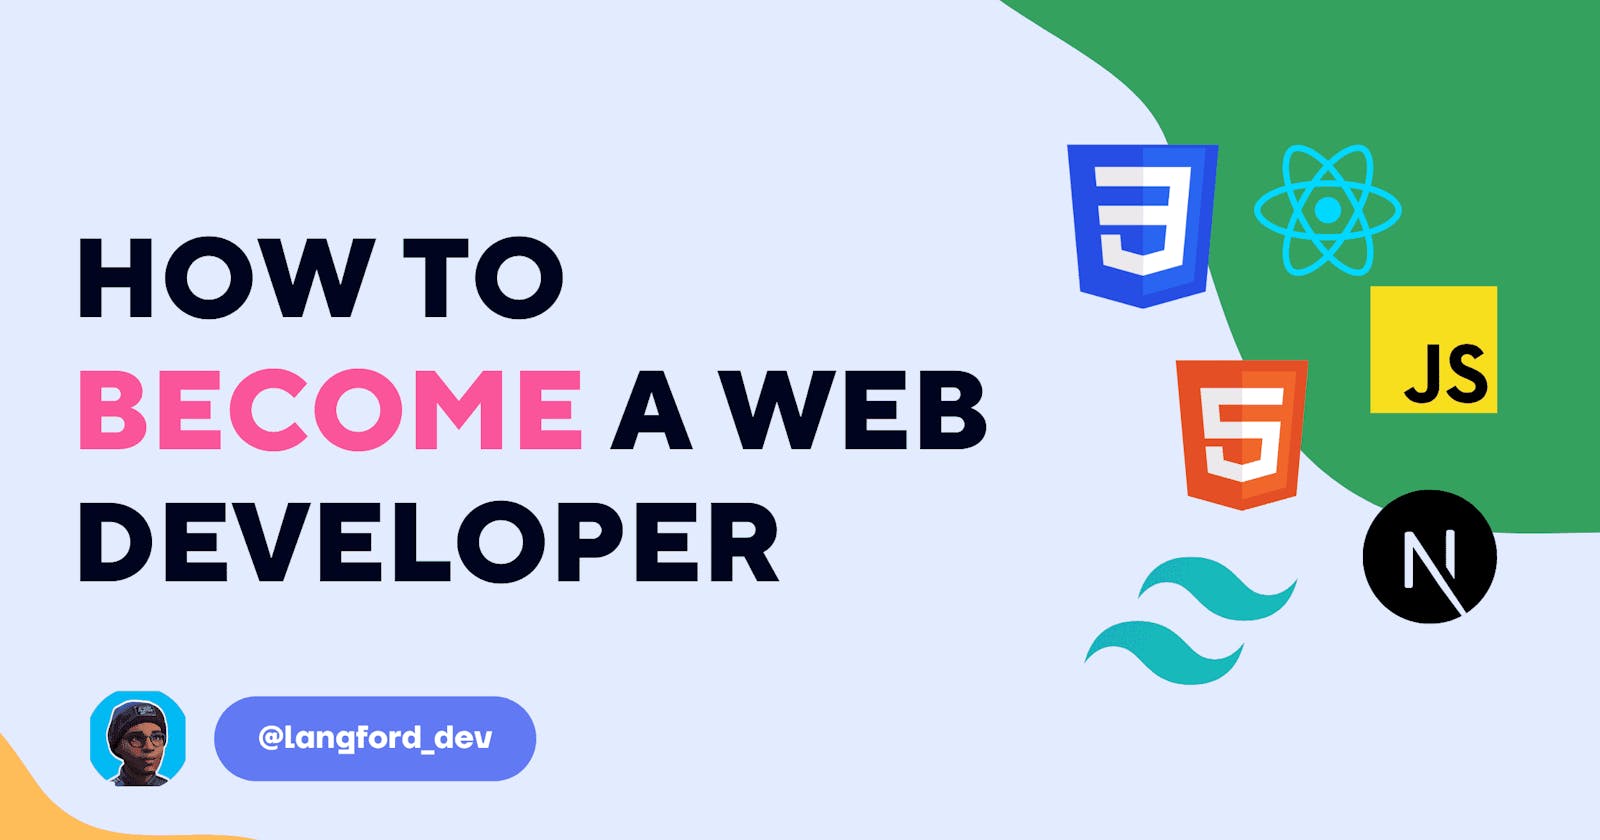 How to become a web developer 👨‍💻